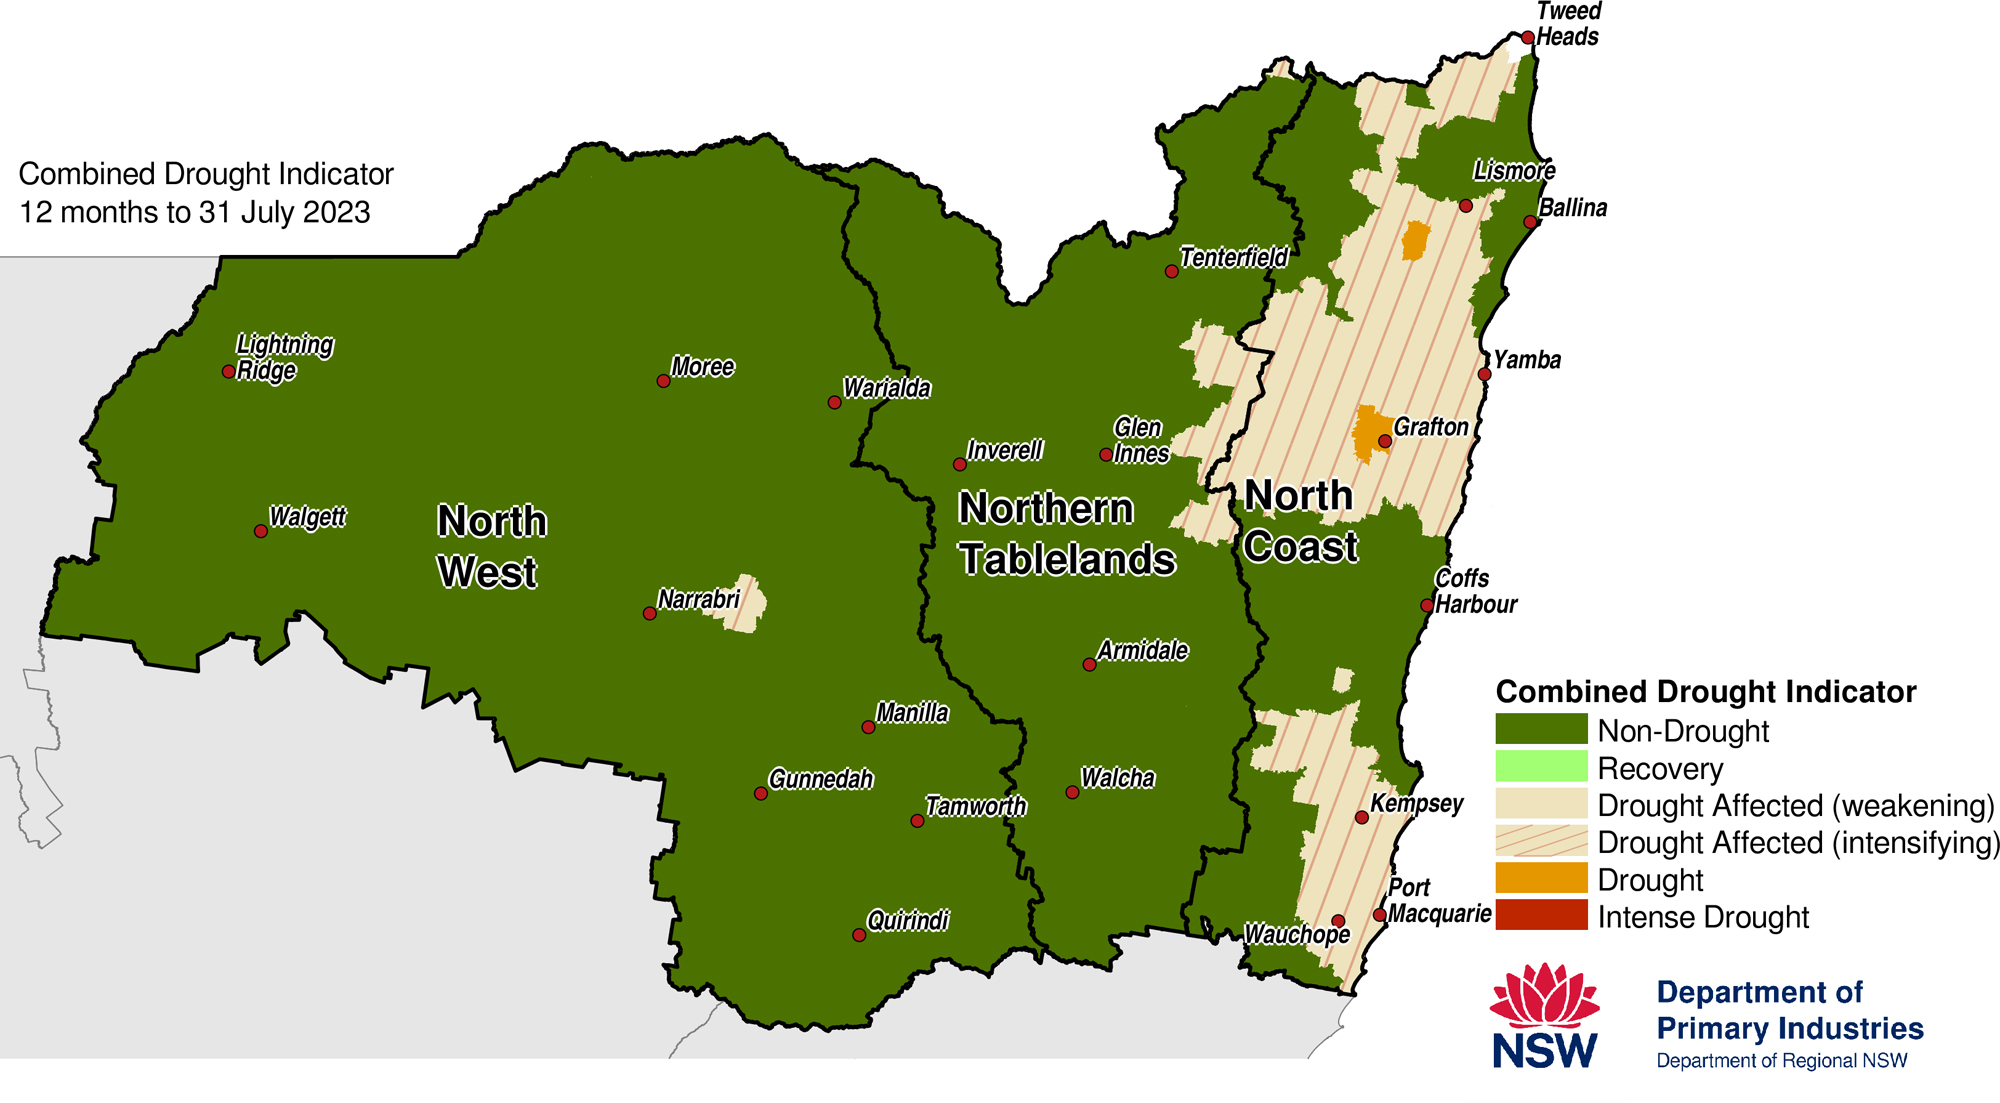 Figure 24. Combined Drought Indicator for the North West, Northern Tableland and North Coast regions 